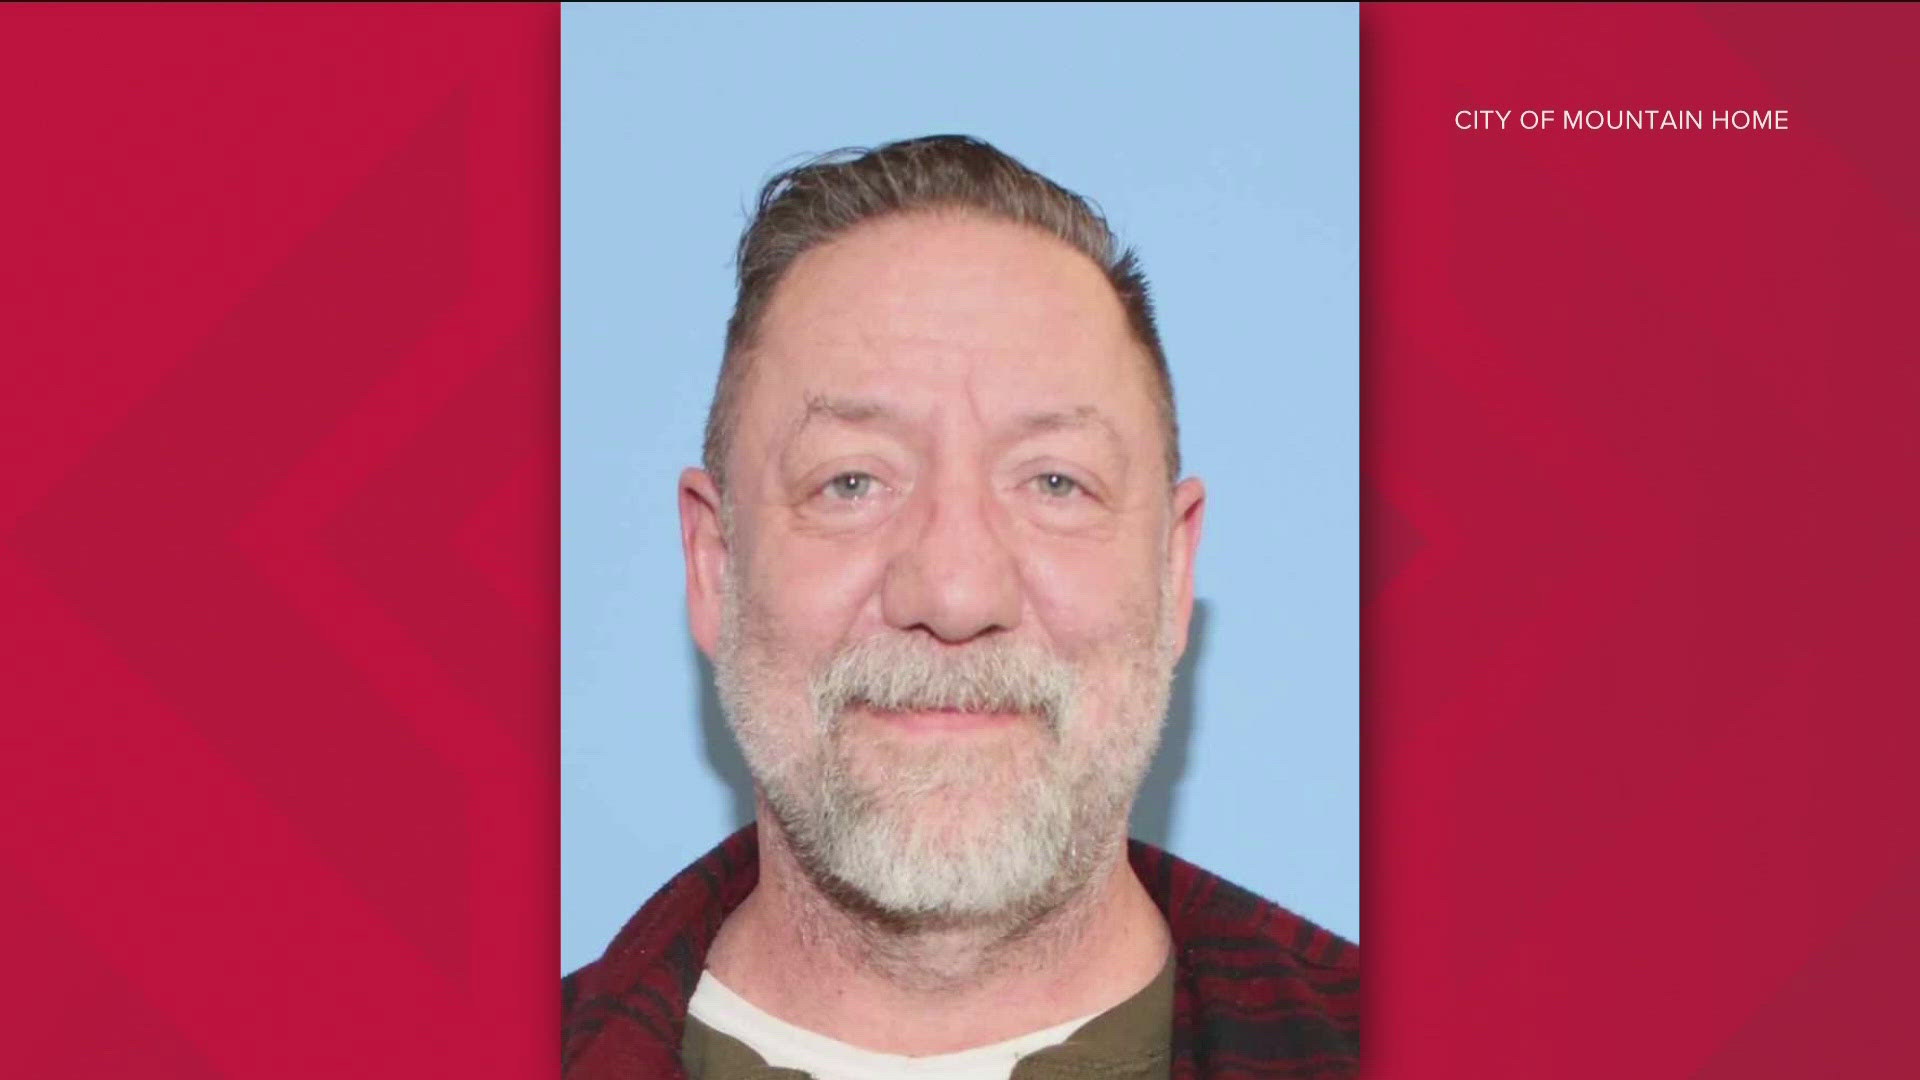 Police are searching for 58-year-old Brian M. McGehee after a man was found dead in a room at the Thunderbird Motel in Mountain Home.